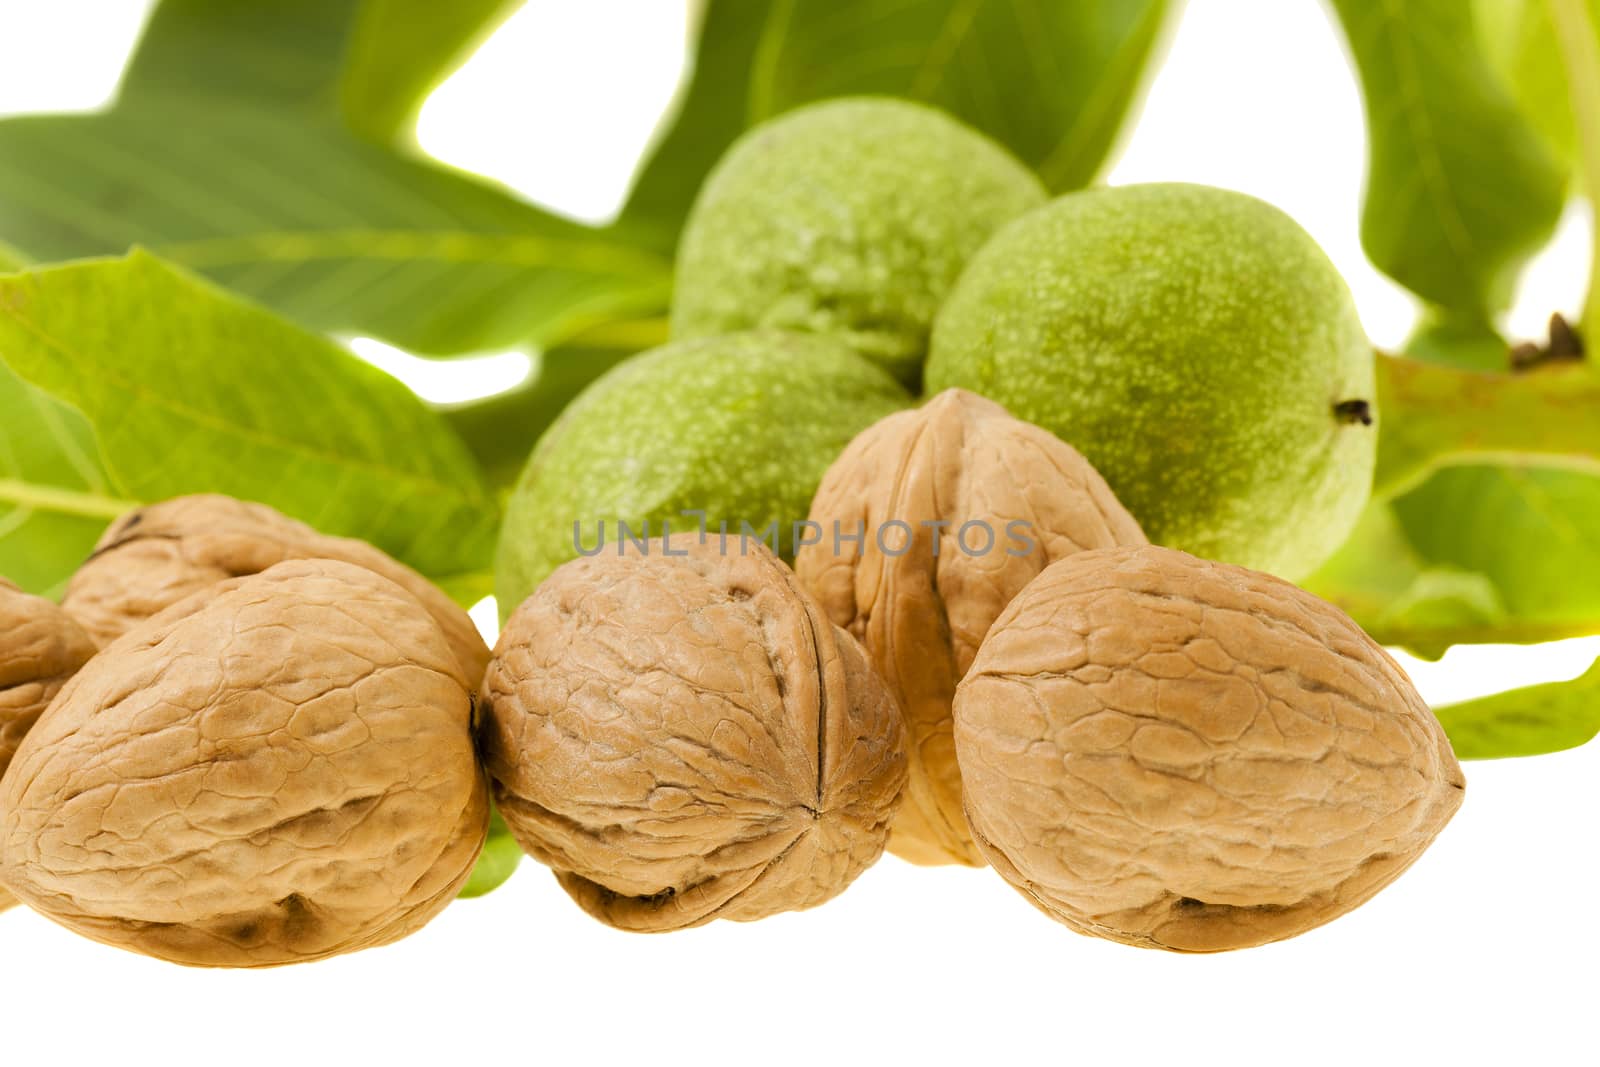  photographed close-up of walnuts isolated on white background